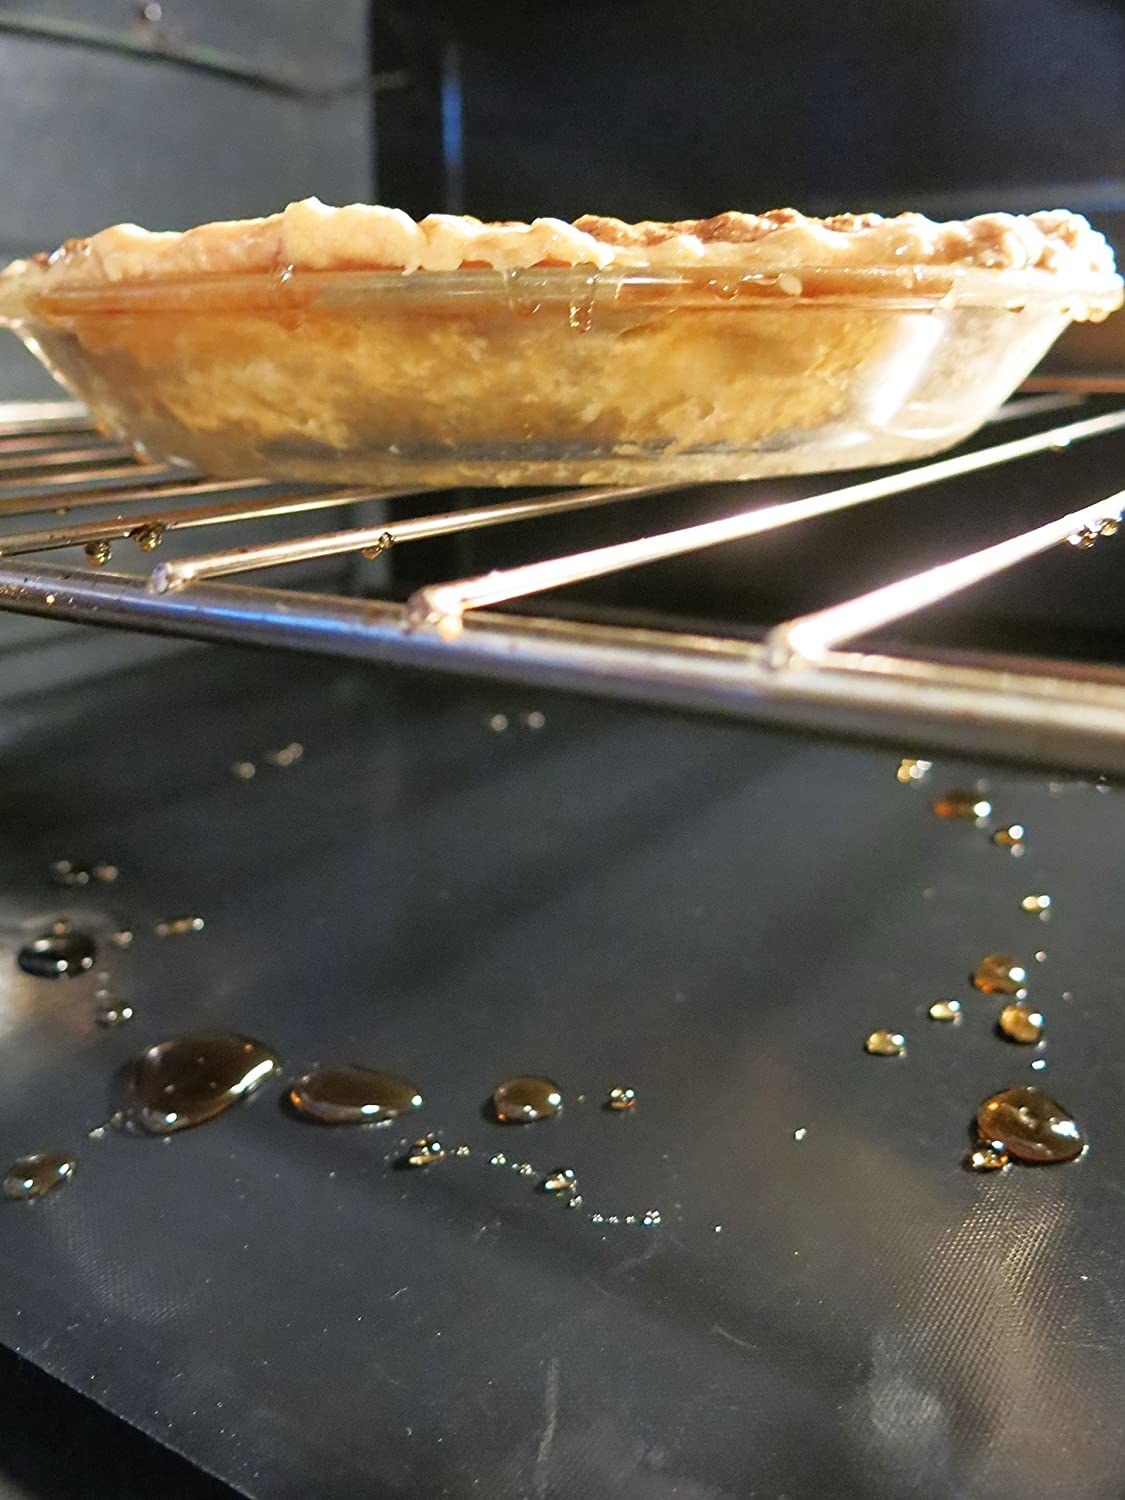 oven liner in bottom of oven catching drippings from a baking pie 